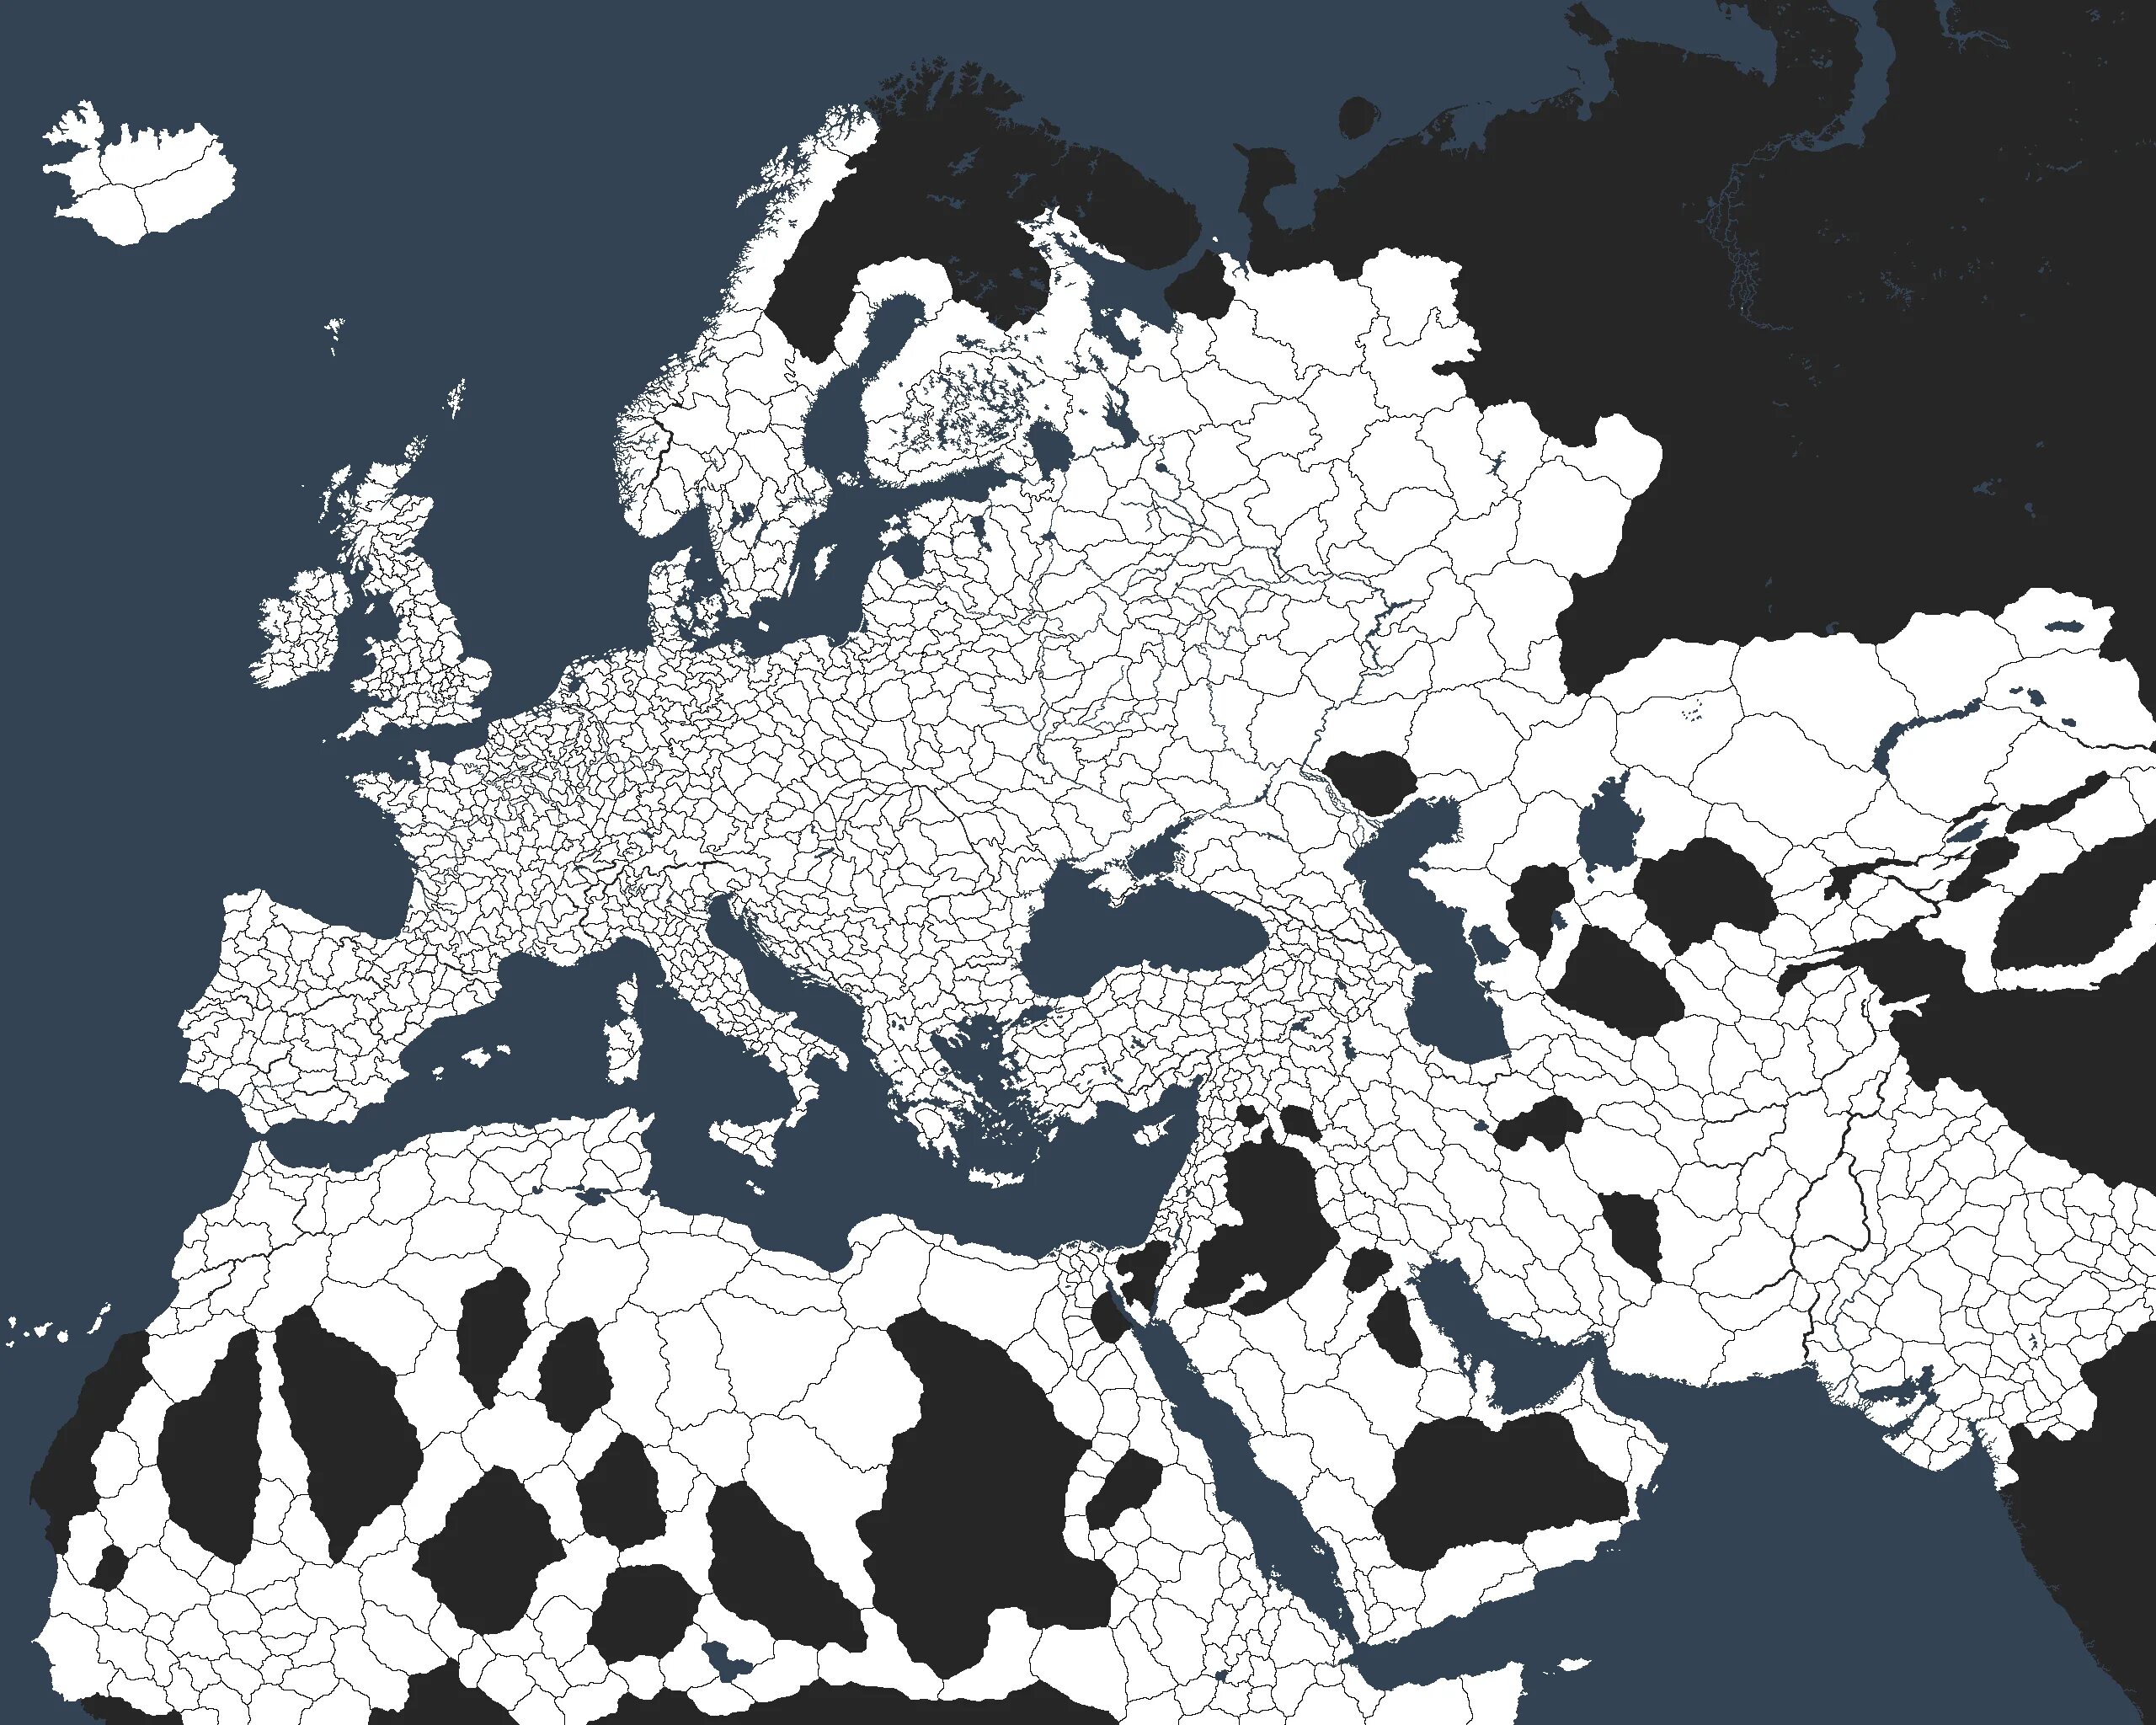 Maps for mapping. Ck2 ID карта провинций. CK 2 карта провинций. Crusader Kings 2 ID провинций. Карта для ВПИ.